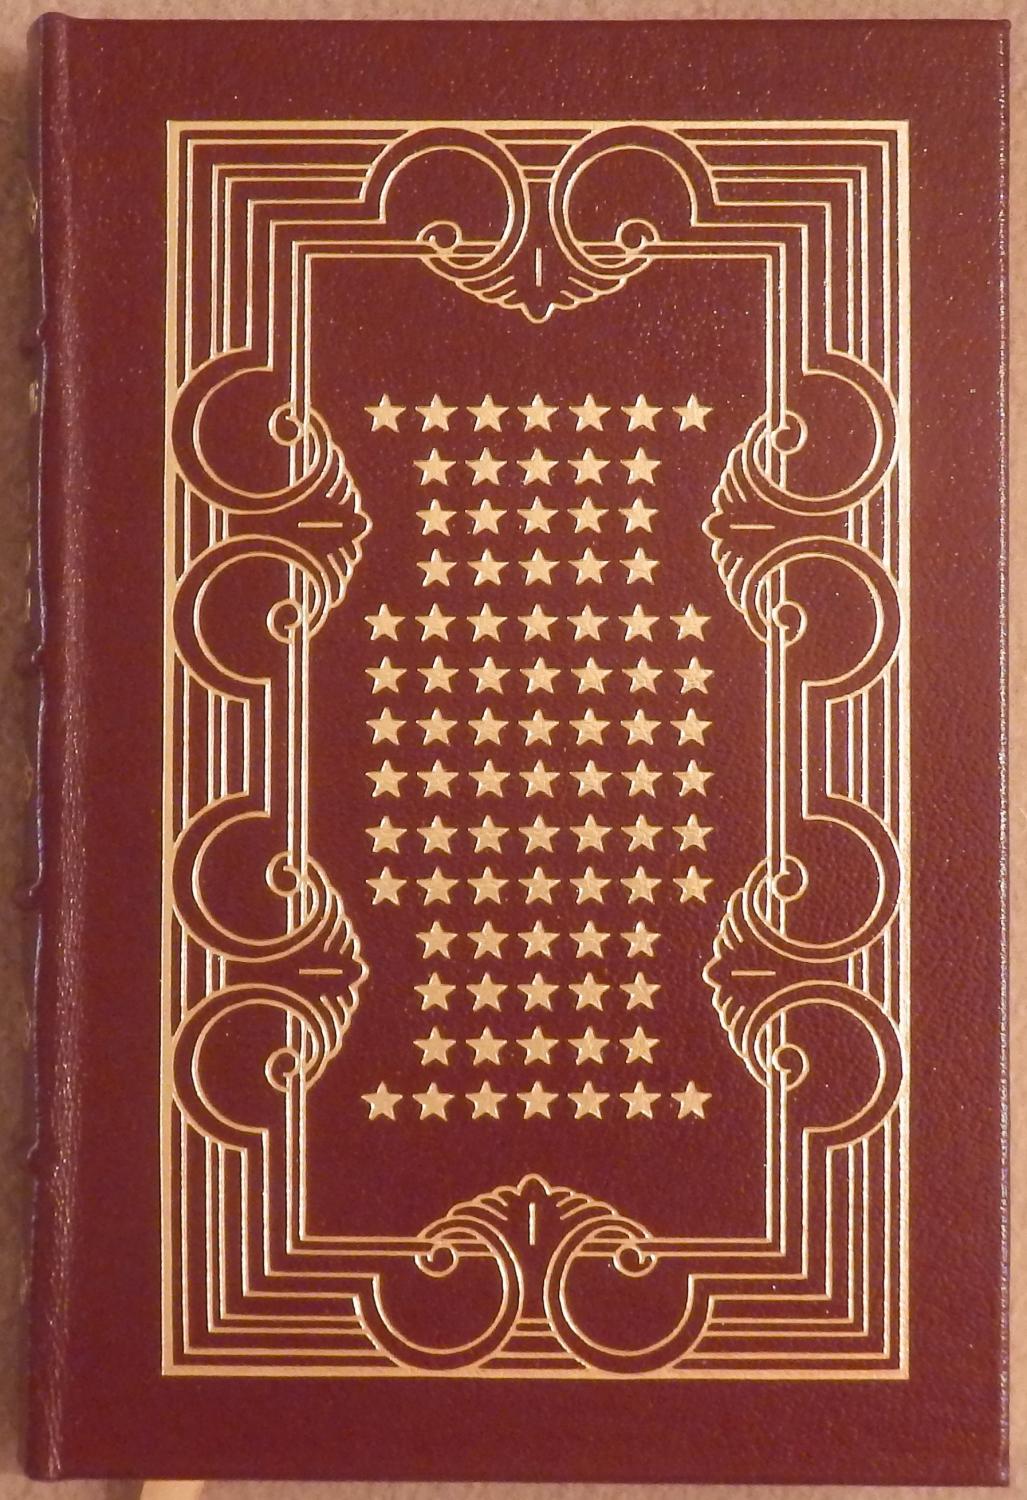 Speaking My Mind Special Easton Press Edition Signed in the book with JSA LOA - Reagan, Ronald